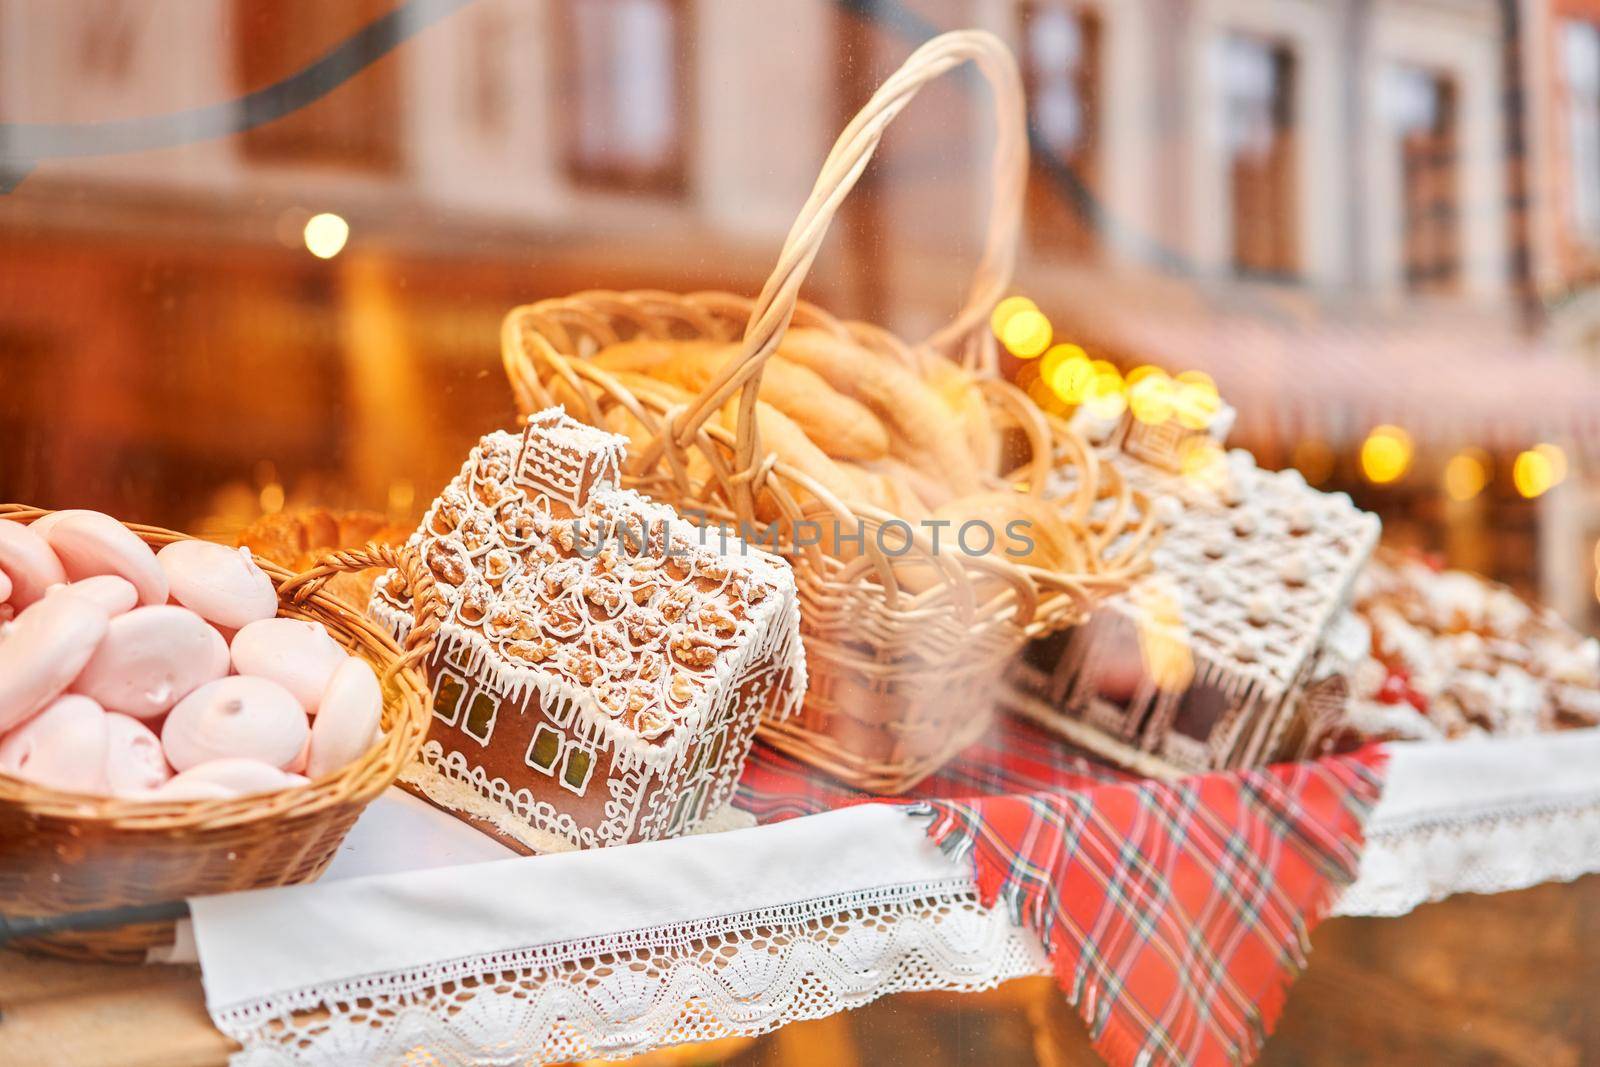 A bakery showcase in a European city for Christmas. Gingerbread house, pretzel, apple crumble, buns. Bread on Christmas and New year.